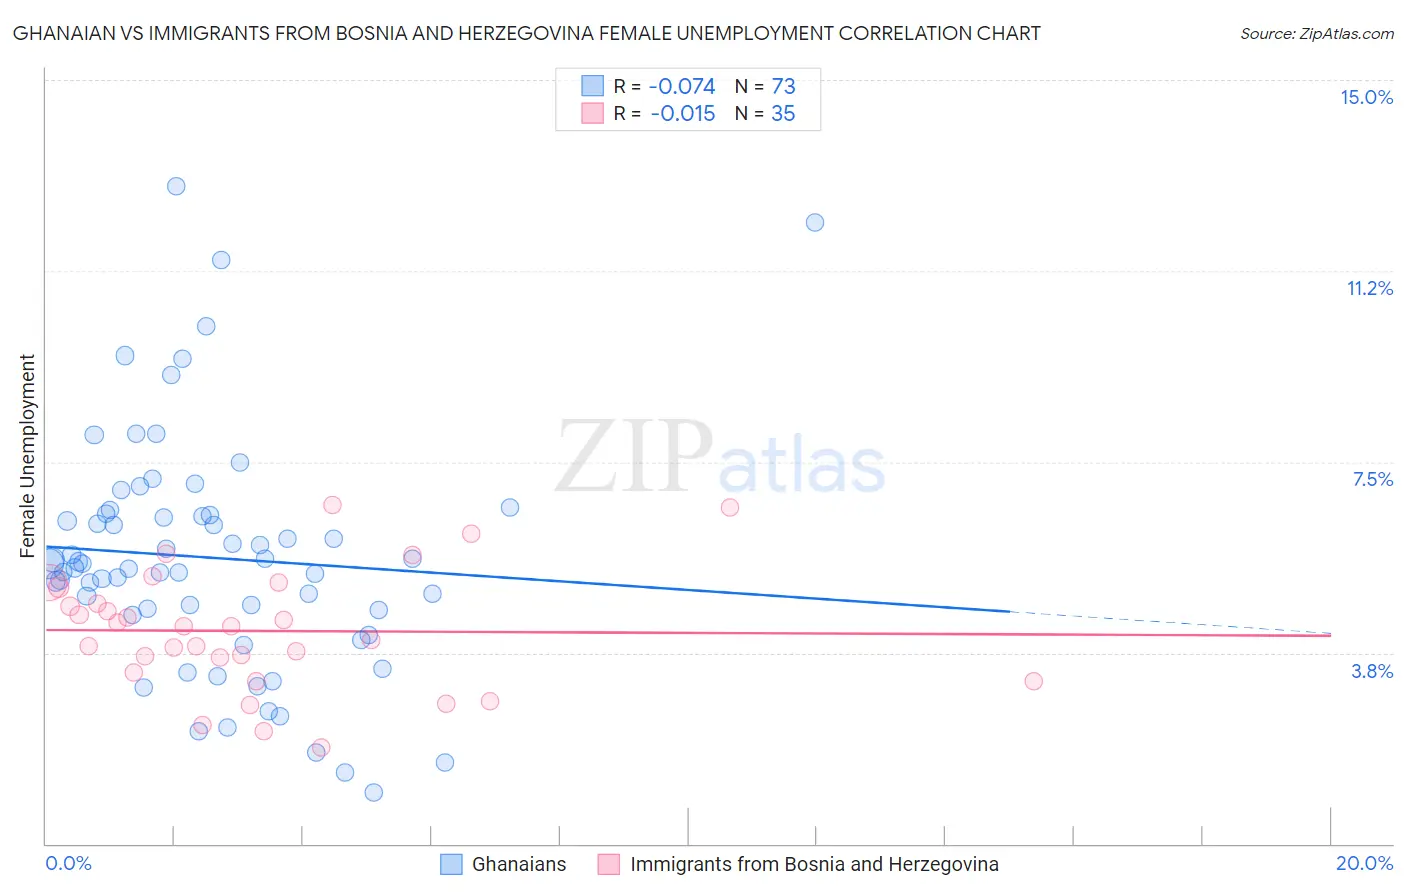 Ghanaian vs Immigrants from Bosnia and Herzegovina Female Unemployment